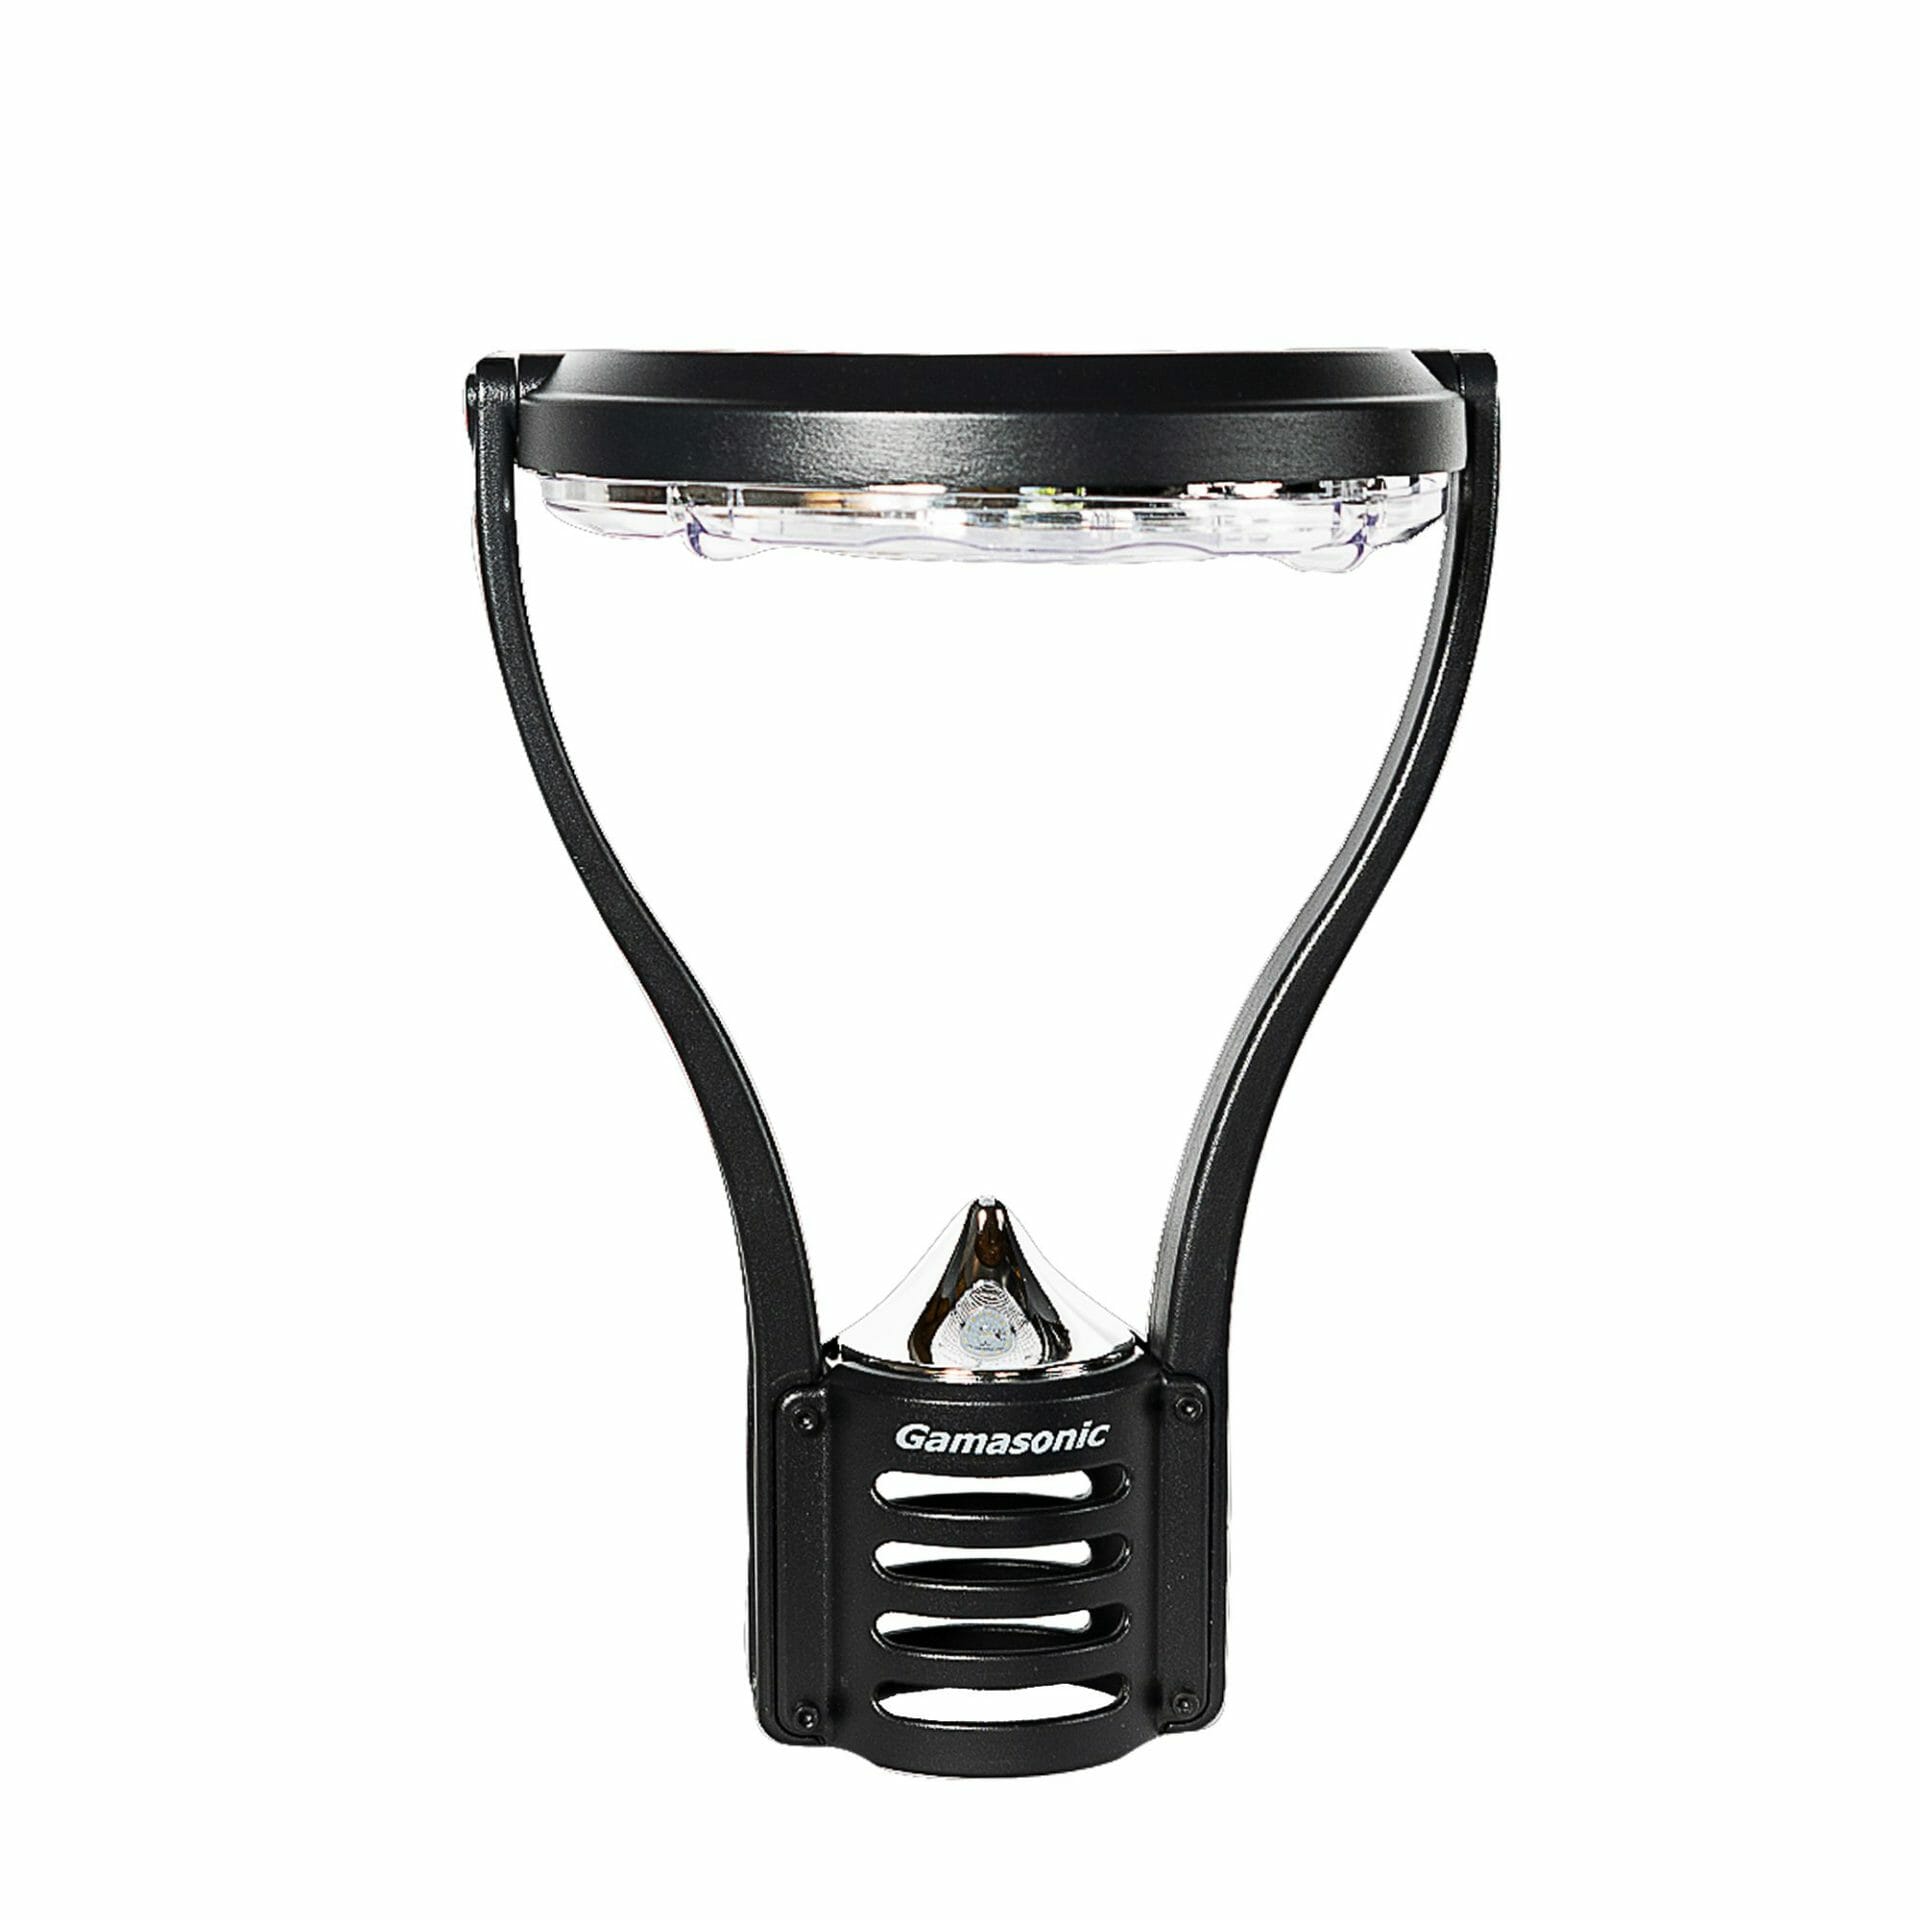 Hydro Glow Fishing Lights - New solar post top lights are ready to